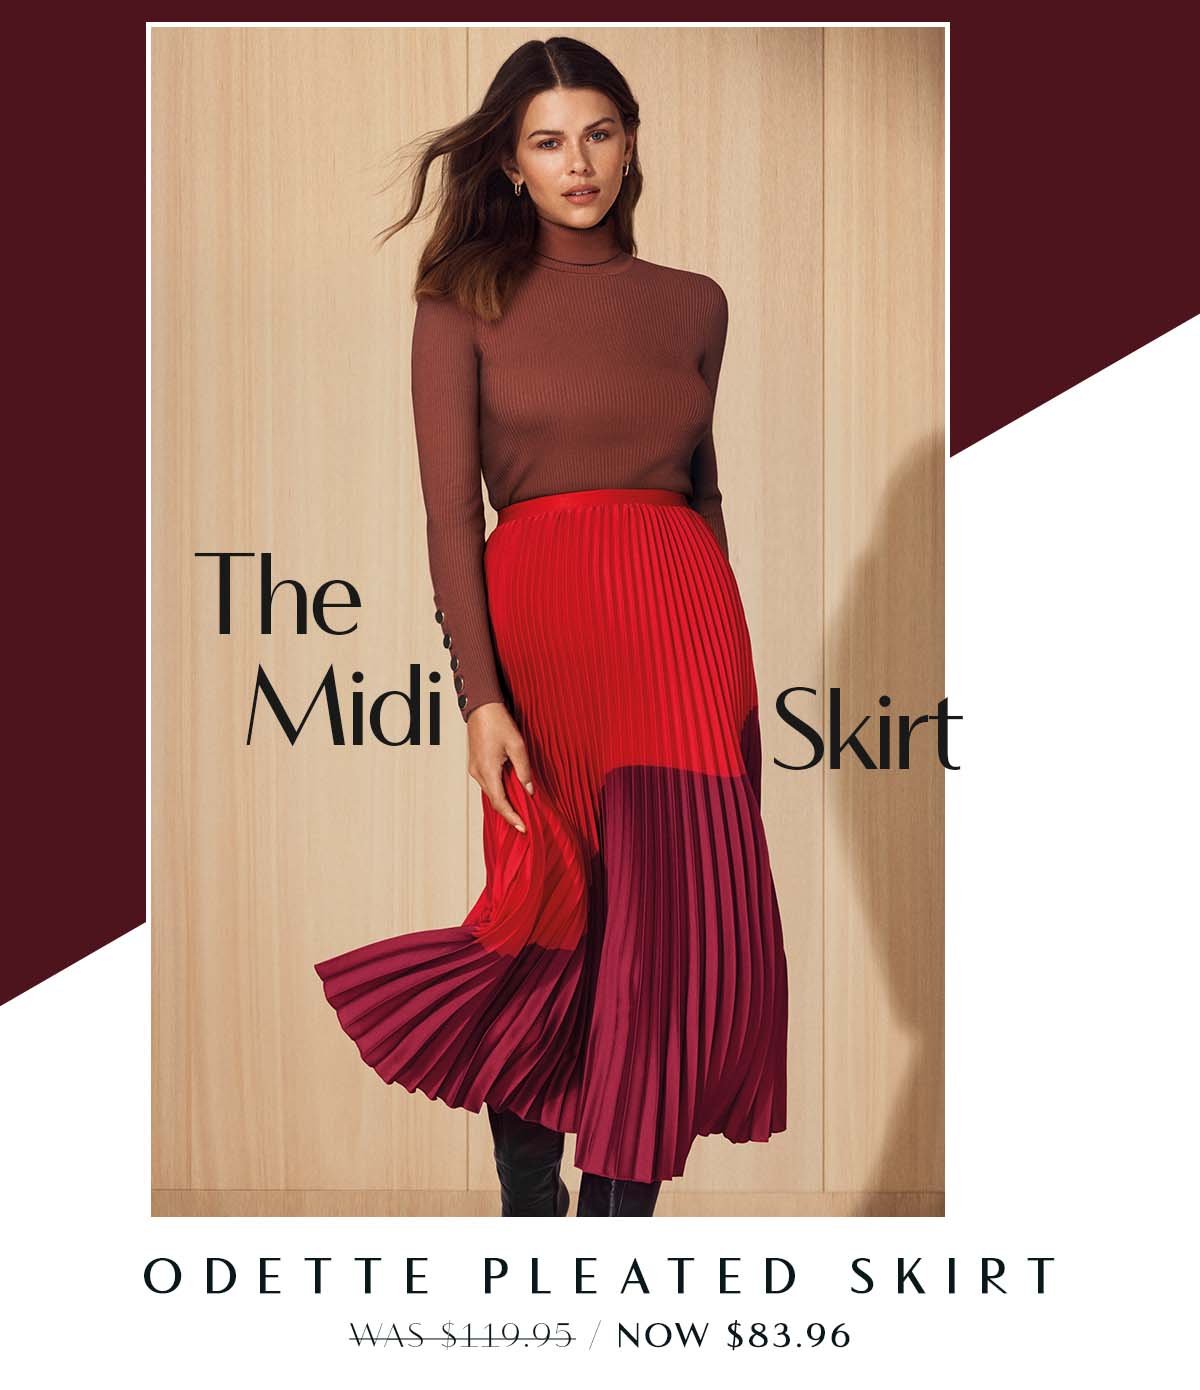 The Midi Skirt. Odette Pleated Skirt WAS $119.95 / NOW $83.96